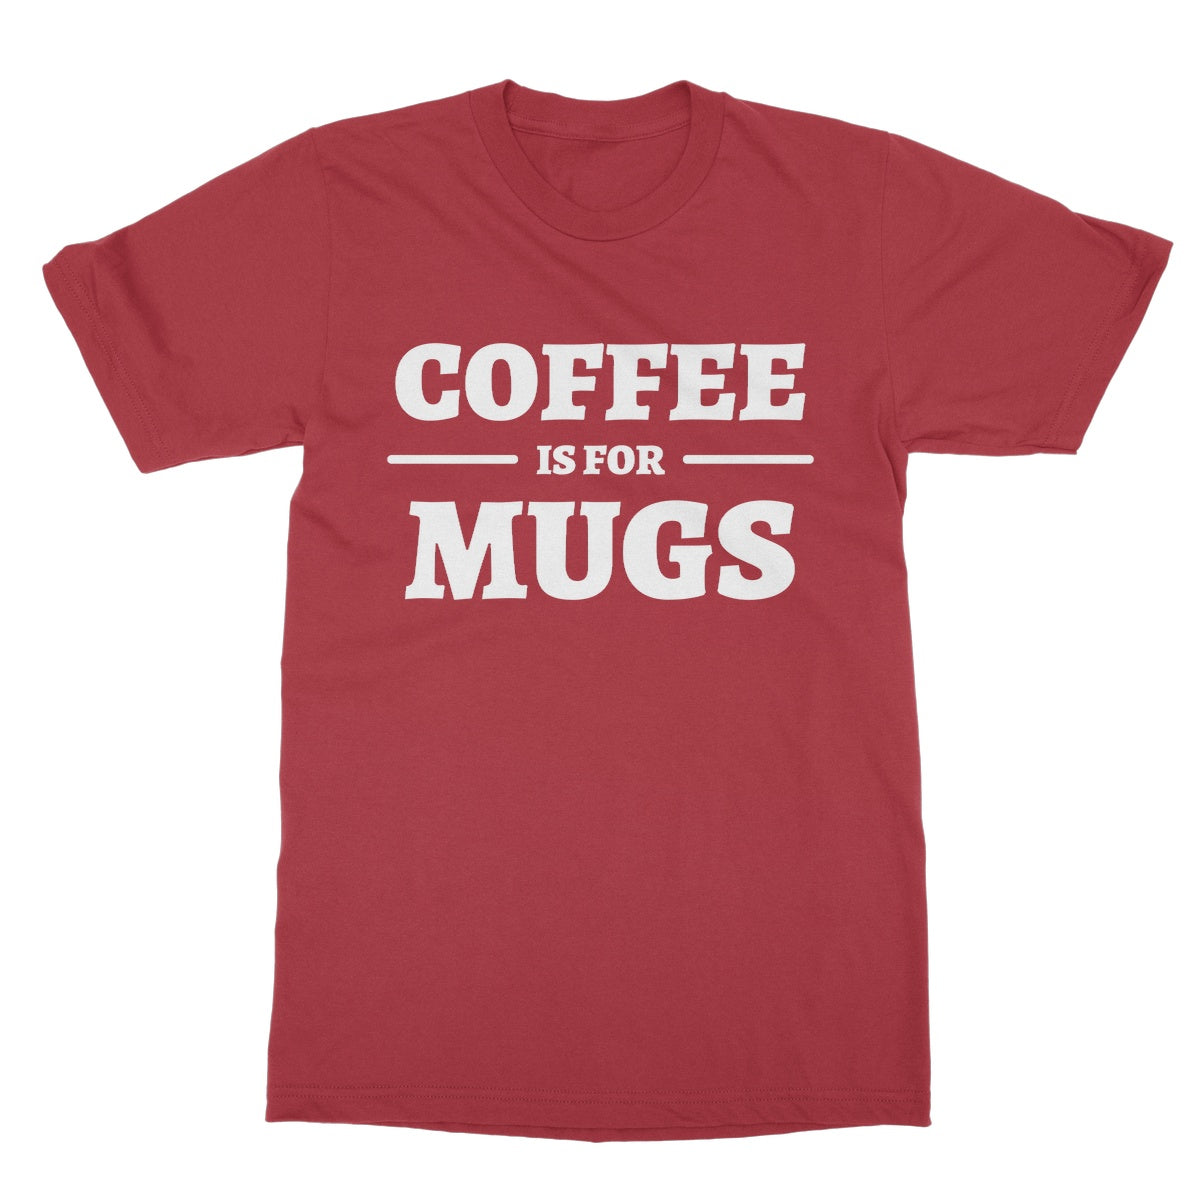 coffee is for mugs t shirt red